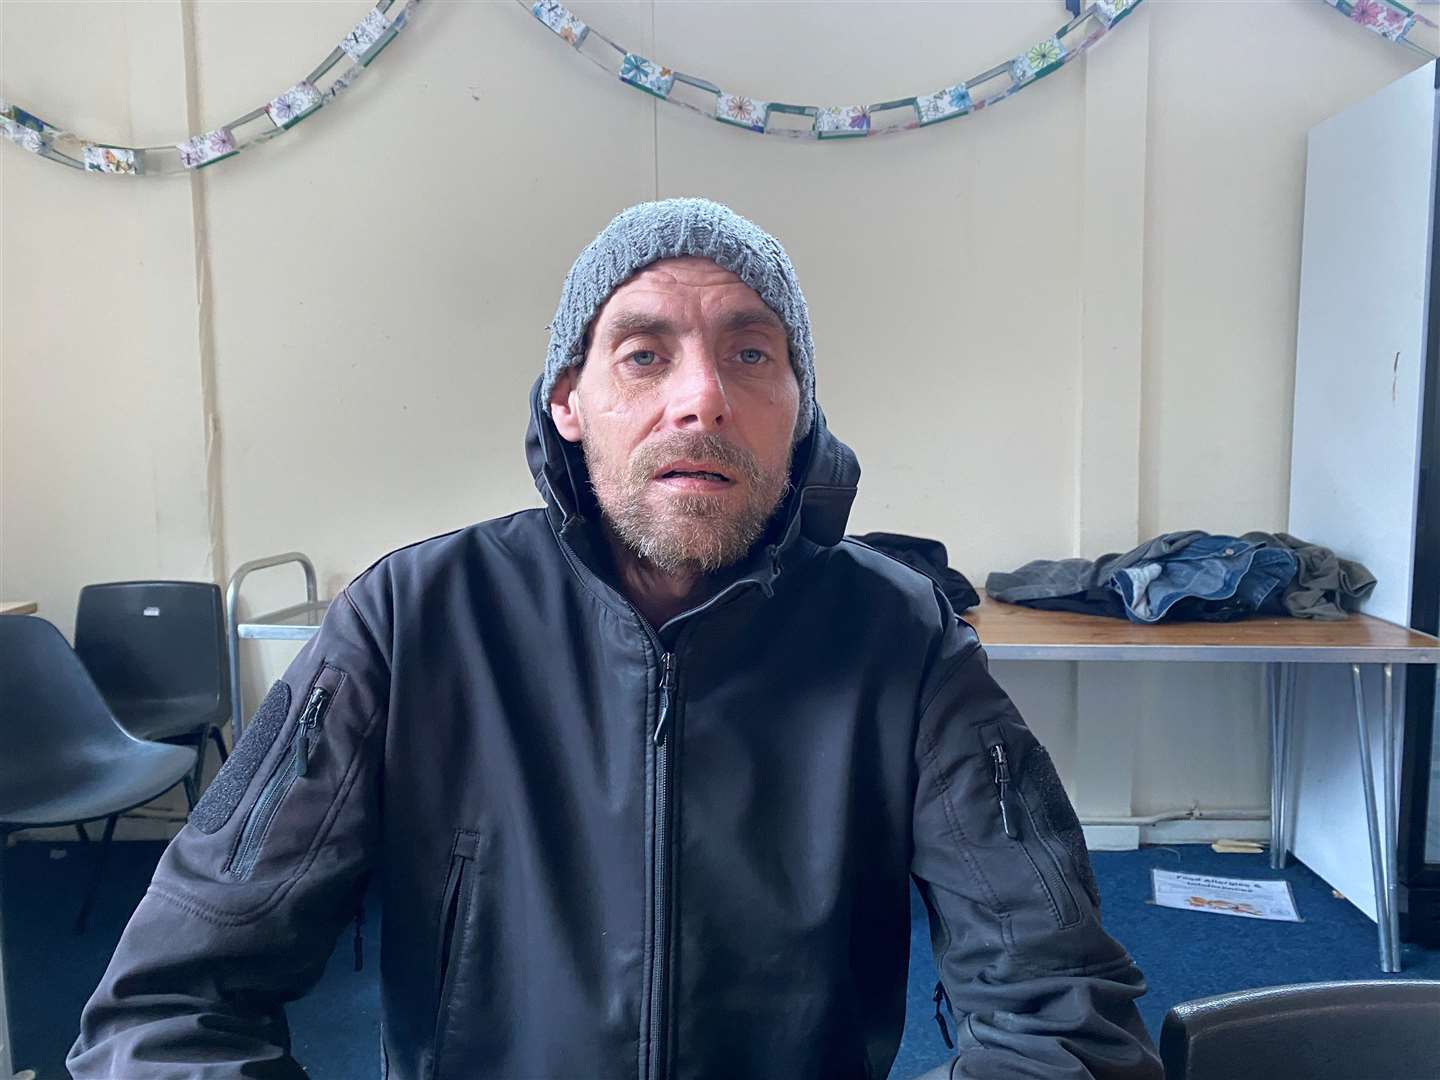 Dan is just one of the many rough sleepers getting help at the Bus Shelter Kent Community Hub in Phoenix House in Sittingbourne